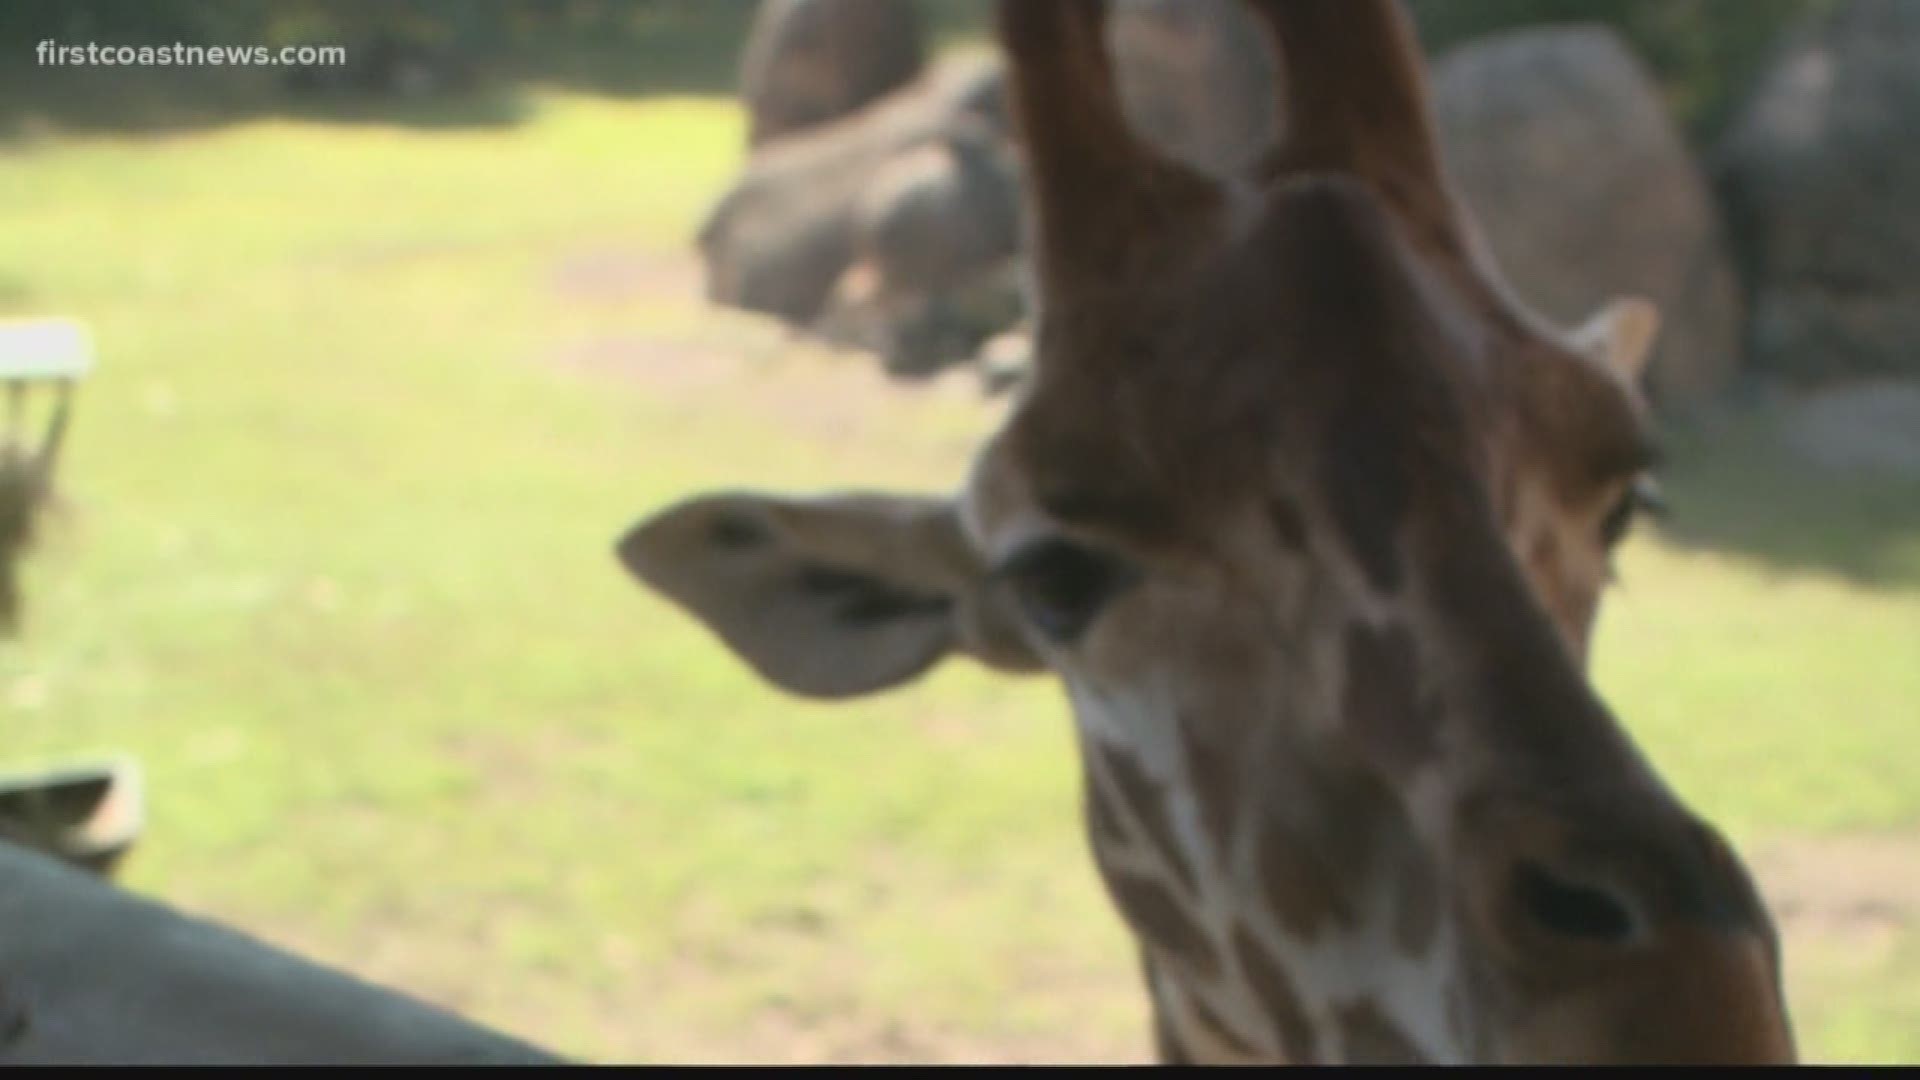 One of the most recognized animals at the Jacksonville Zoo was Duke the giraffe.
Duke passed away Tuesday at 21-years-old, about three years past the average life expectancy for male giraffes.